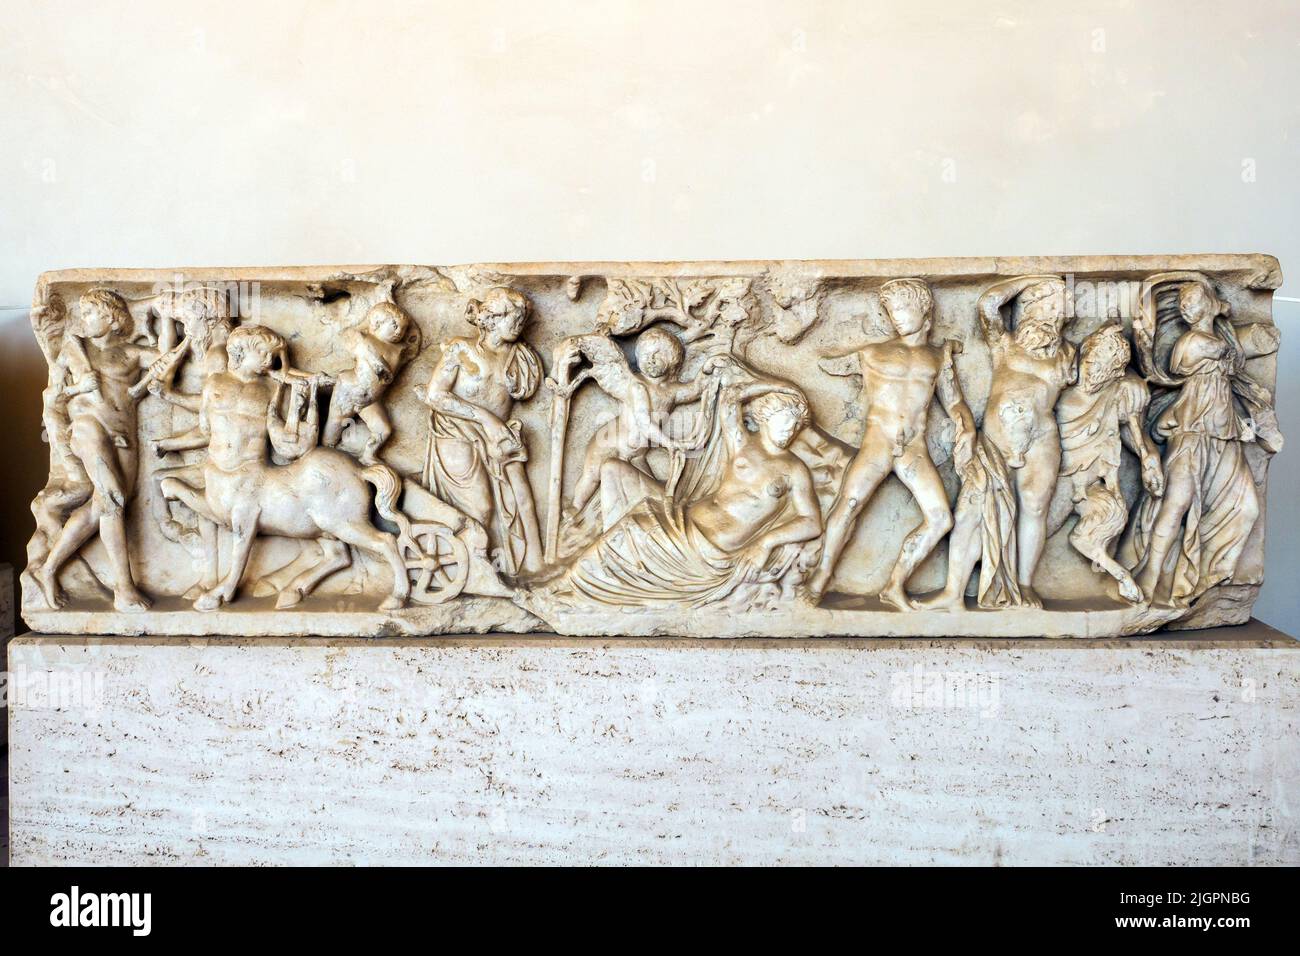 Sarcophagus representing Dionysus unveiling Arianna and dionysiac scenes. Luni marble. 160-180 AD - Rome via Appia, from the church of SS Nereo e Achilleo - National Roman Museum - The Baths of Diocletian - Rome, Italy Stock Photo